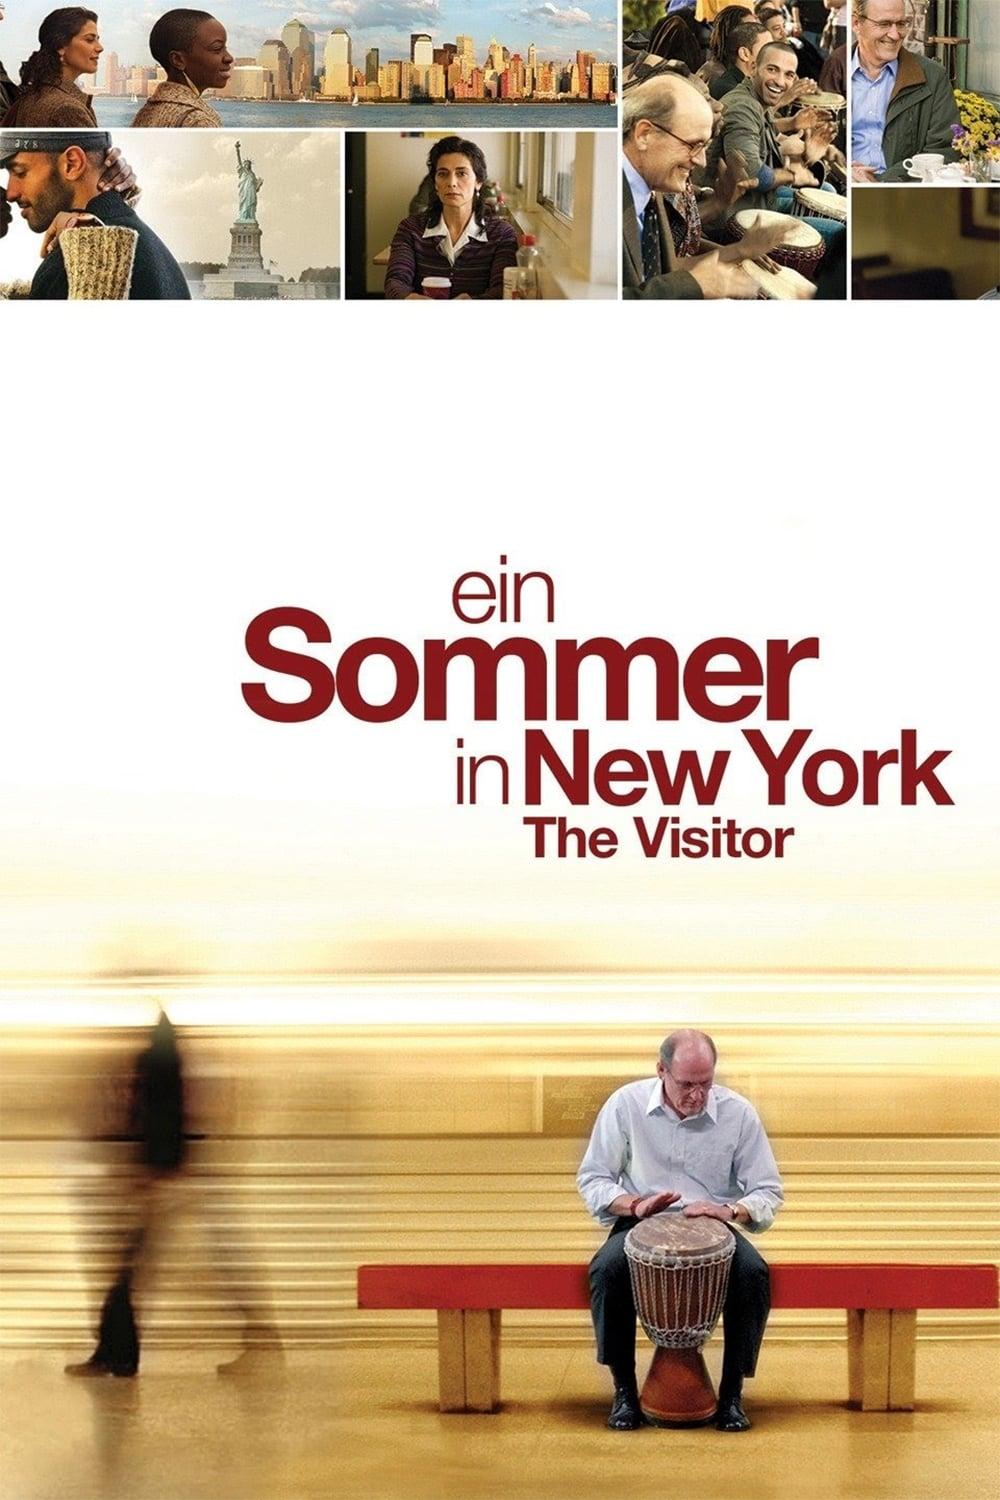 Ein Sommer in New York - The Visitor poster